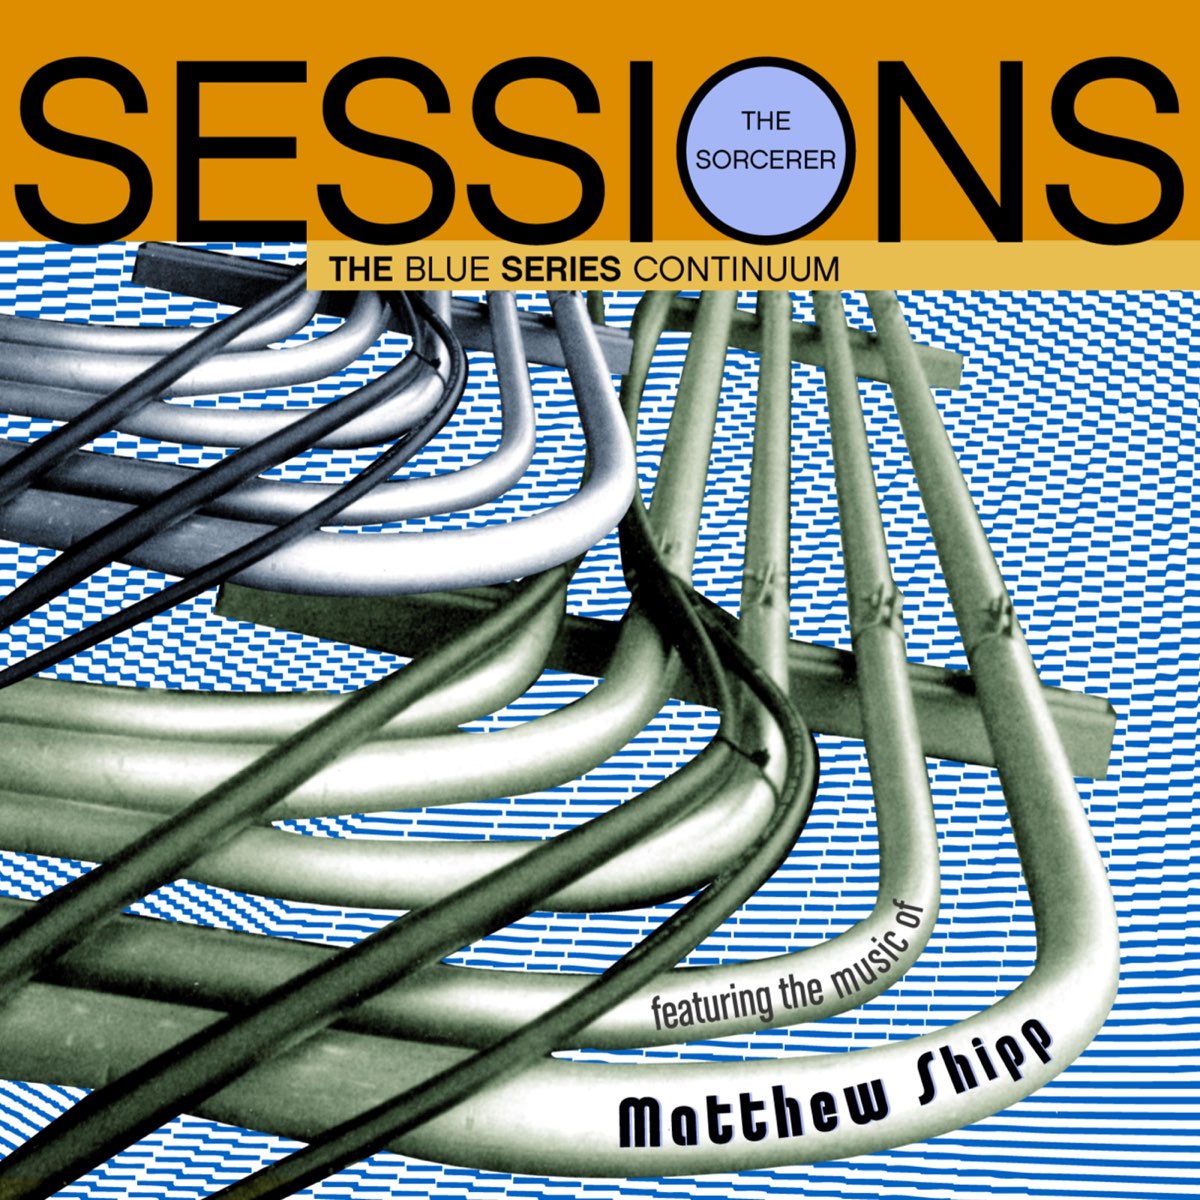 The Blue Series Continuum ? Sorcerer Sessions (Featuring The Music Of Matthew Shipp) gd